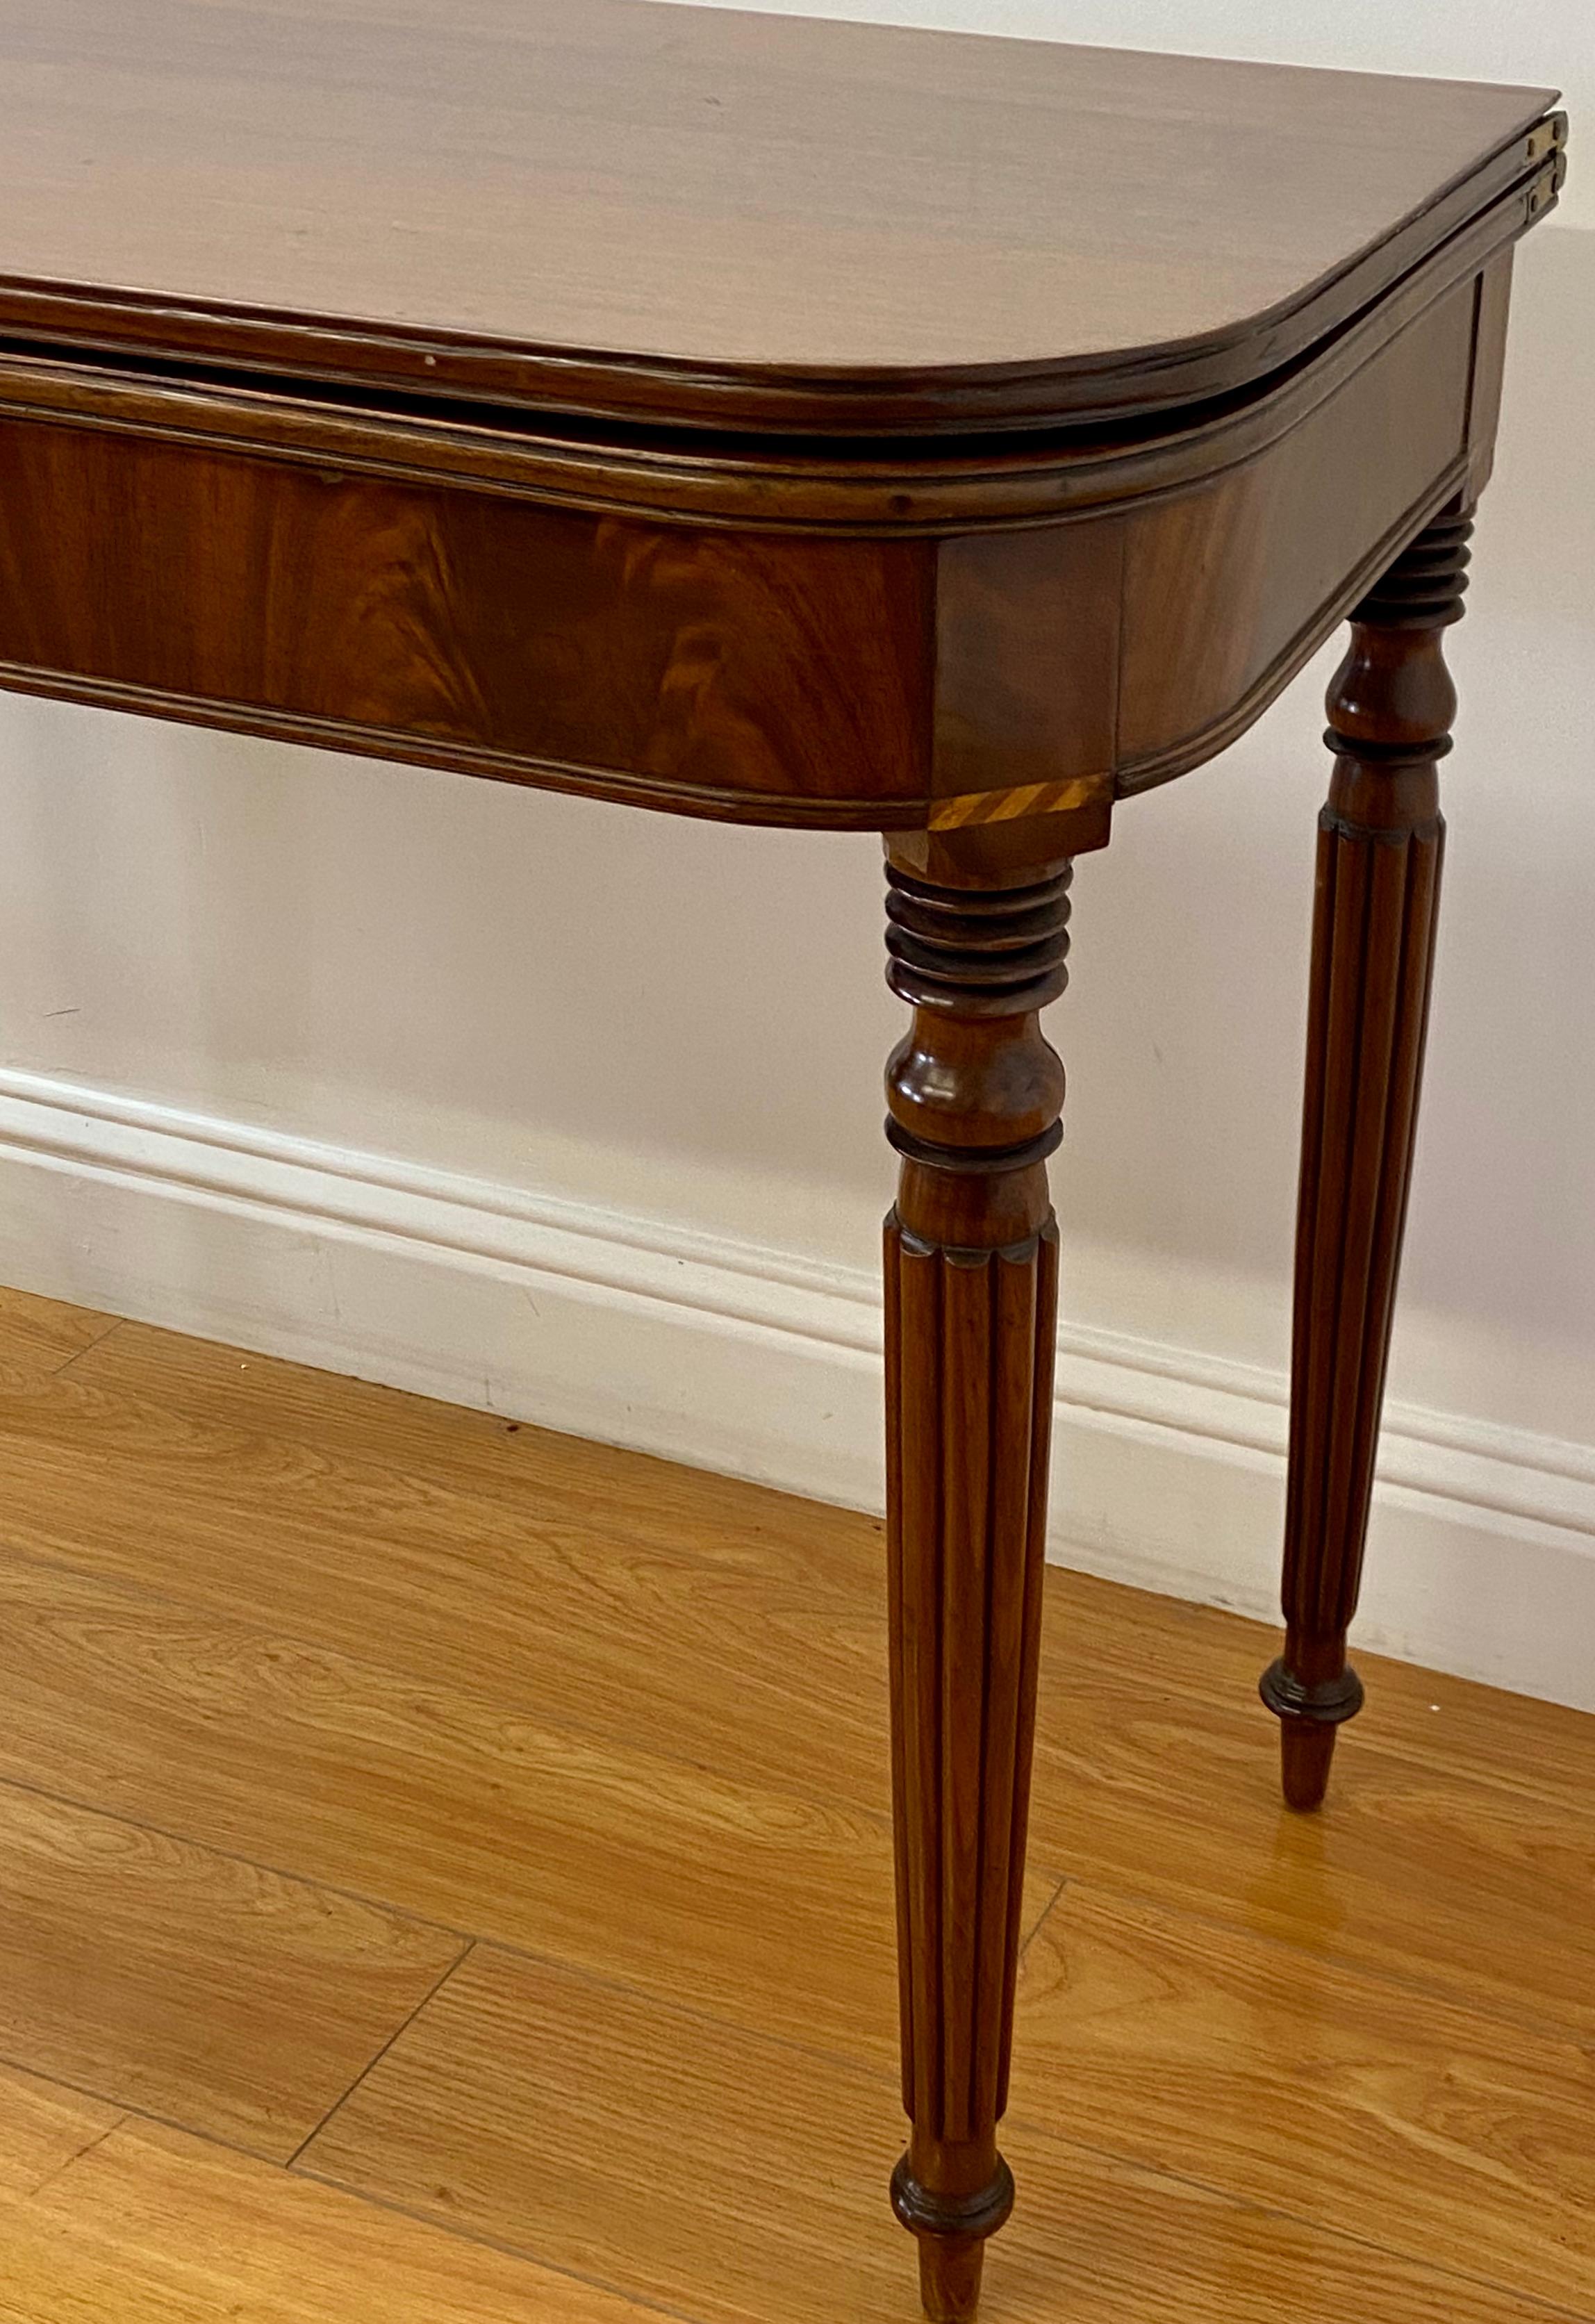 Hand-Crafted 19th Century Mahogany Console / Flip Top Table